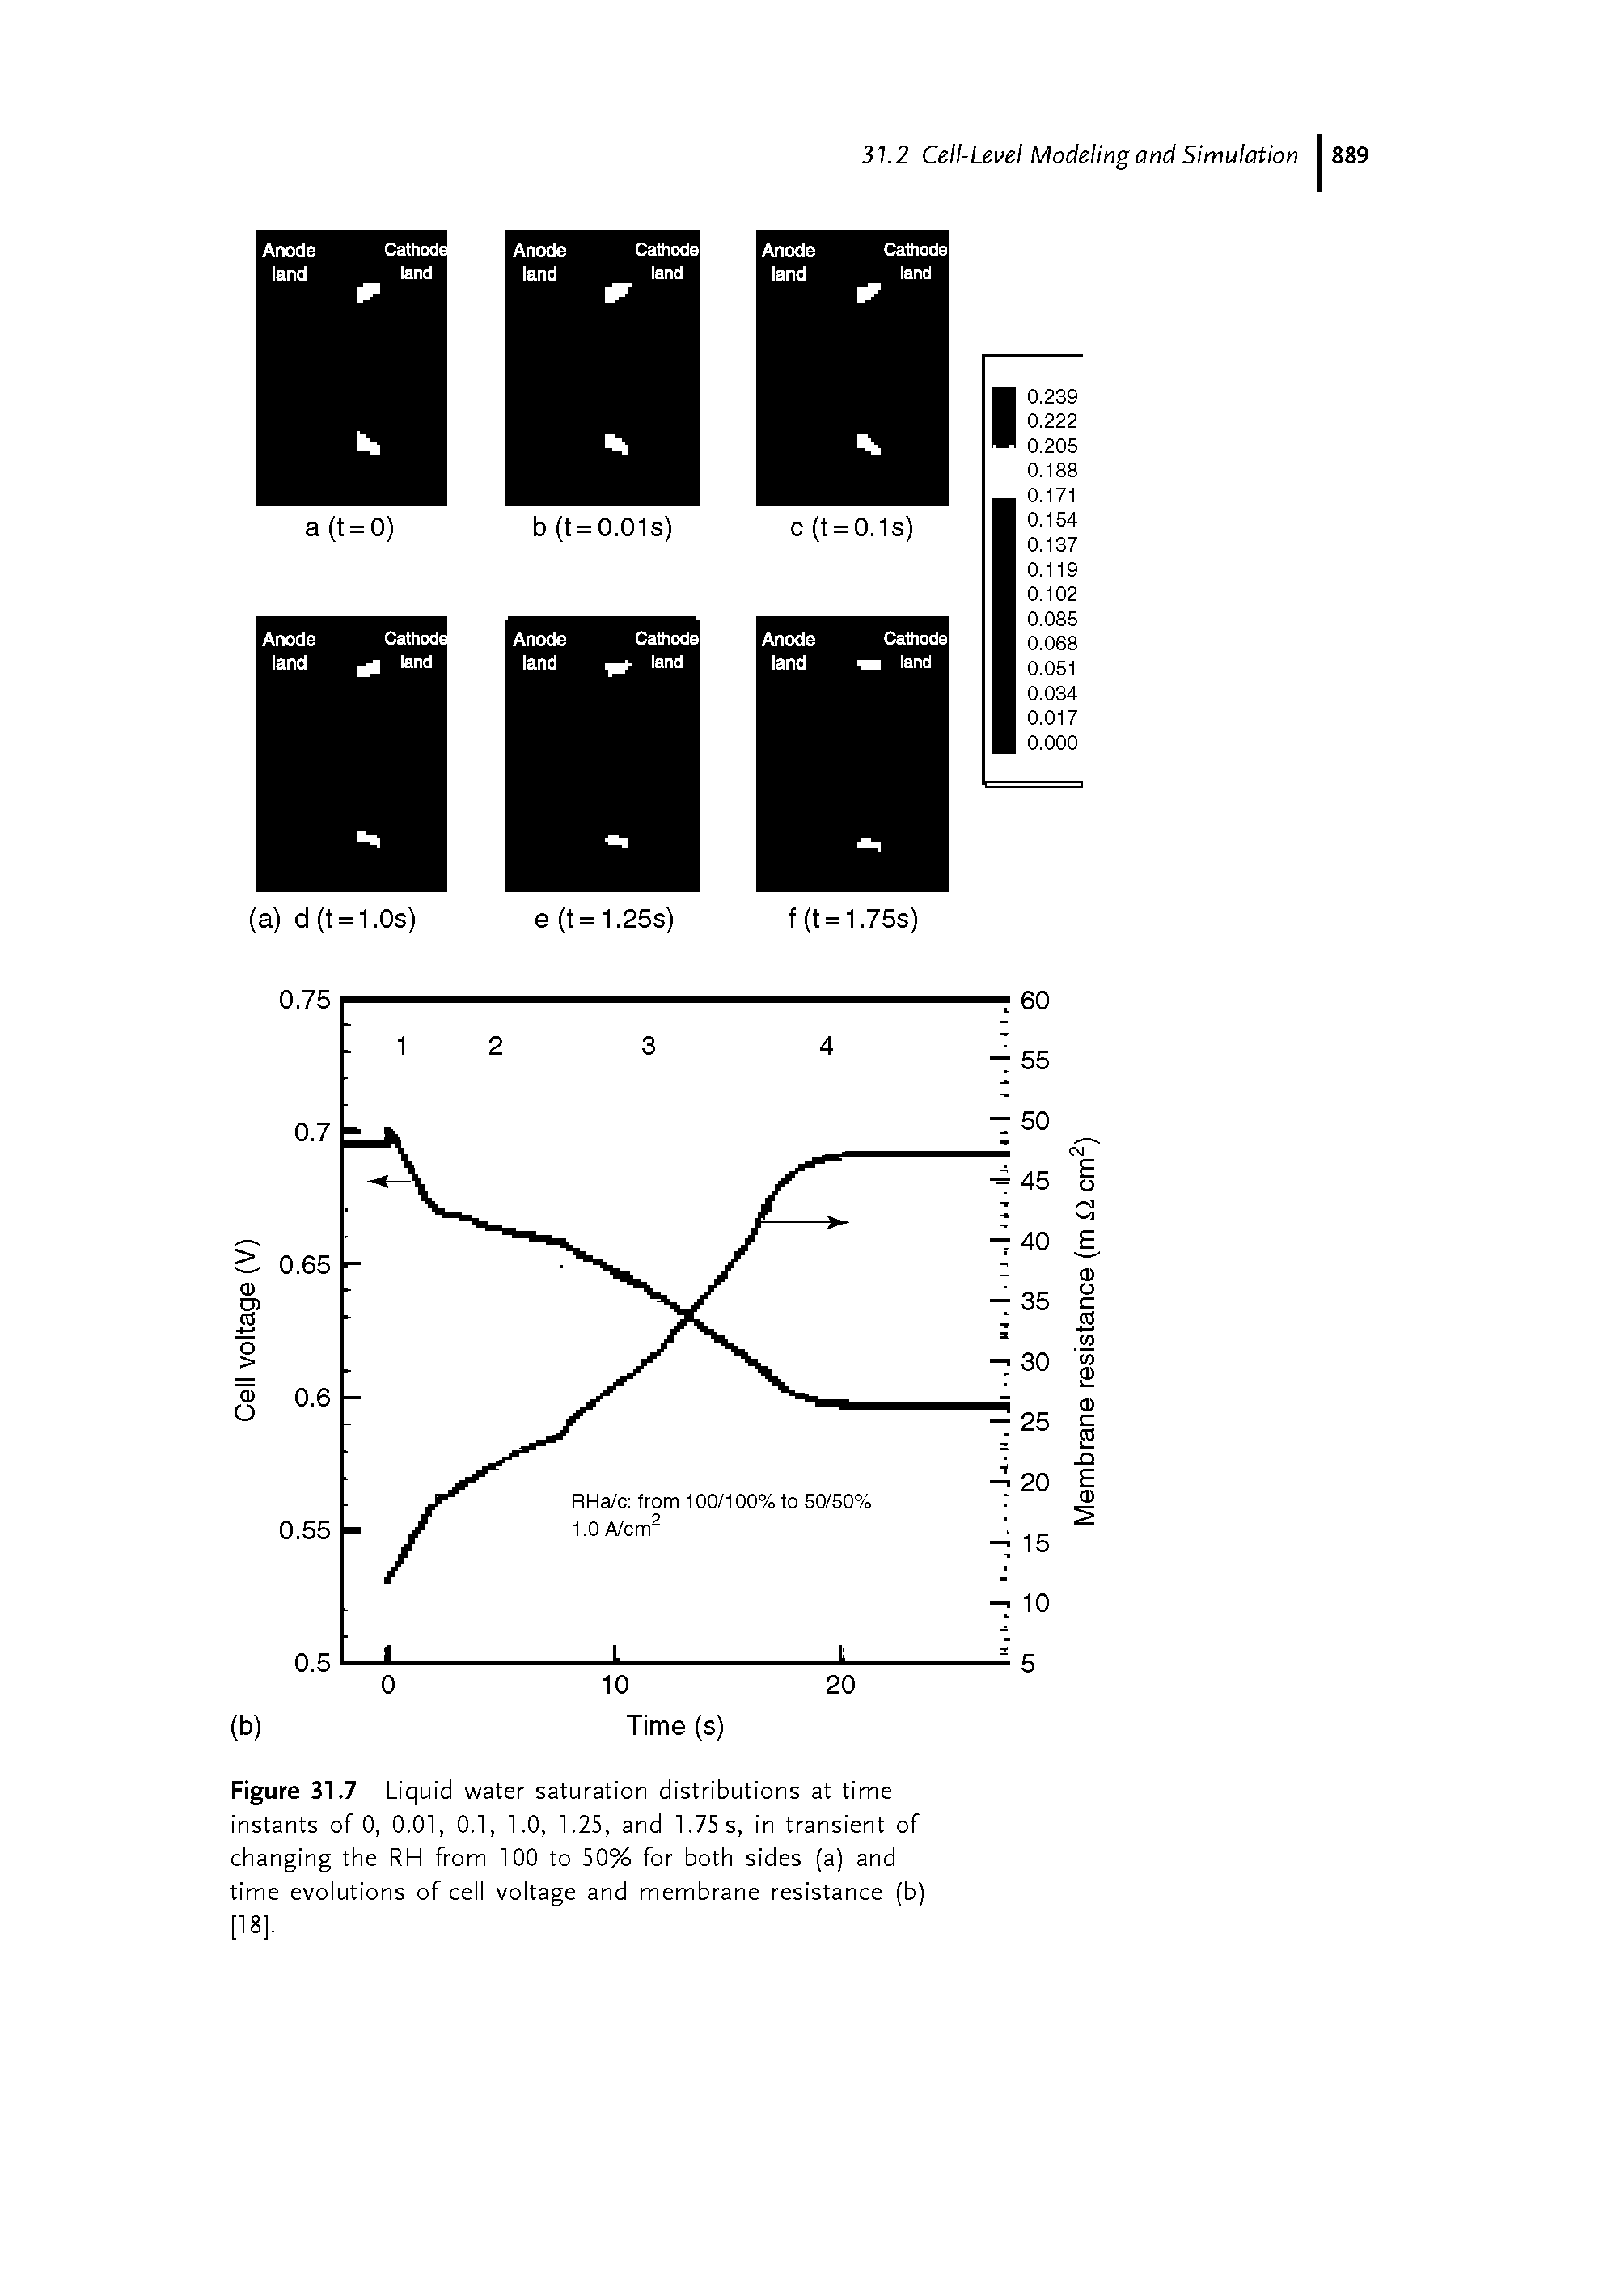 Figure 31.7 Liquid water saturation distributions at time instants of 0, 0.01, 0.1, 1.0, 1.25, and 1.75 s, in transient of changing the RH from 100 to 50% for both sides (a) and time evolutions of cell voltage and membrane resistance (b) [18].